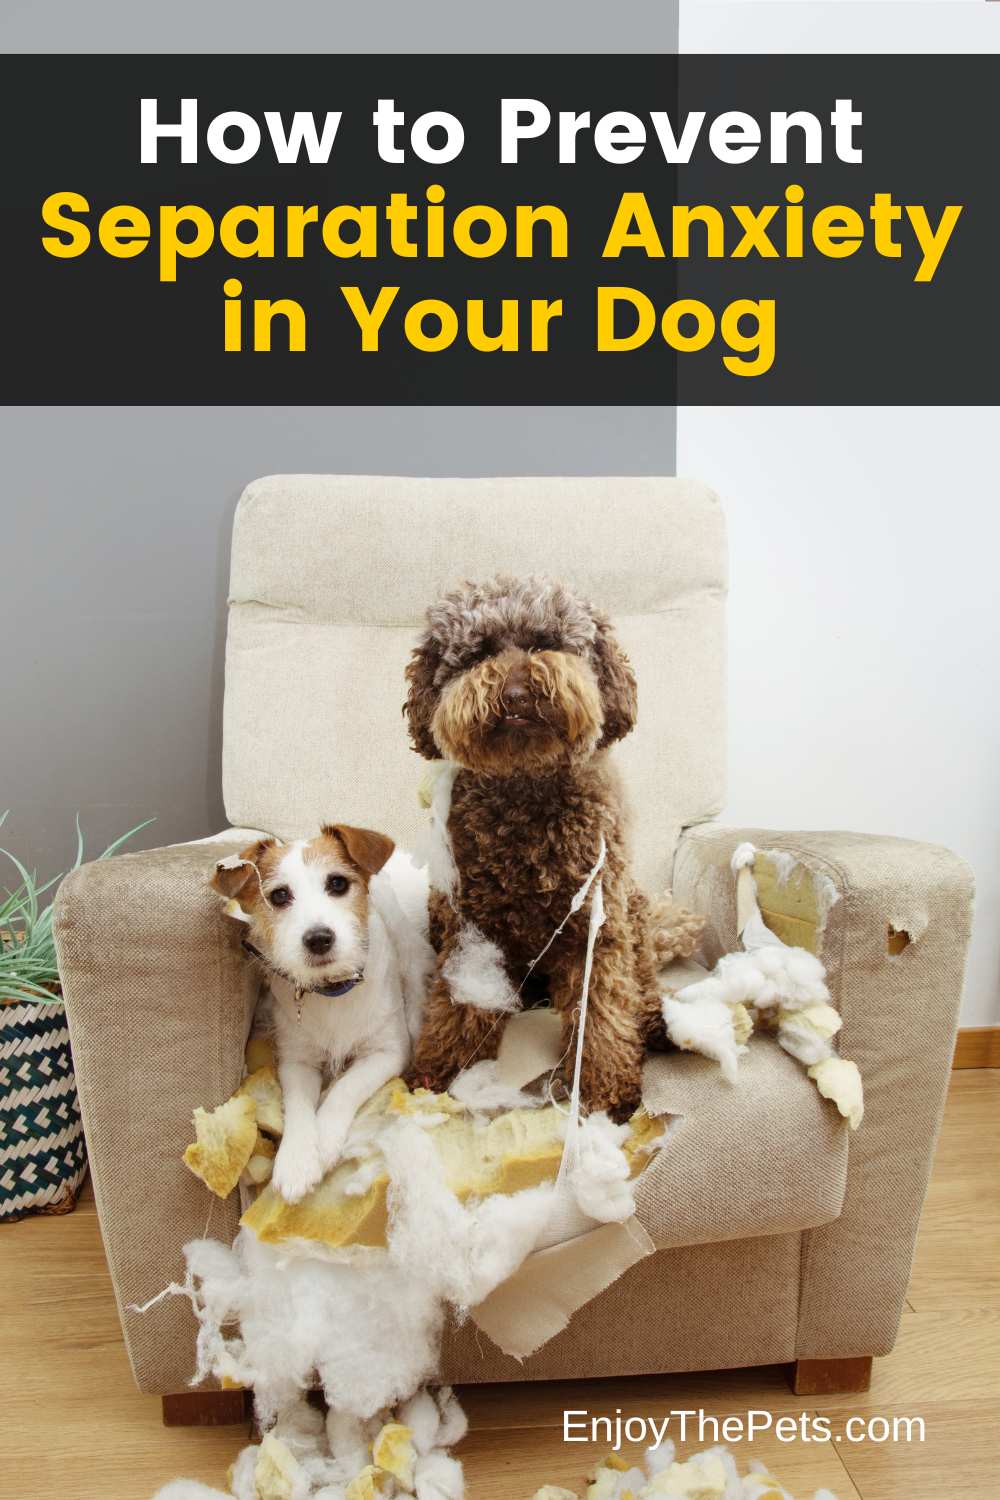 How to Prevent Separation Anxiety in Your Dog (Saying Goodbye Without the Anxiety)